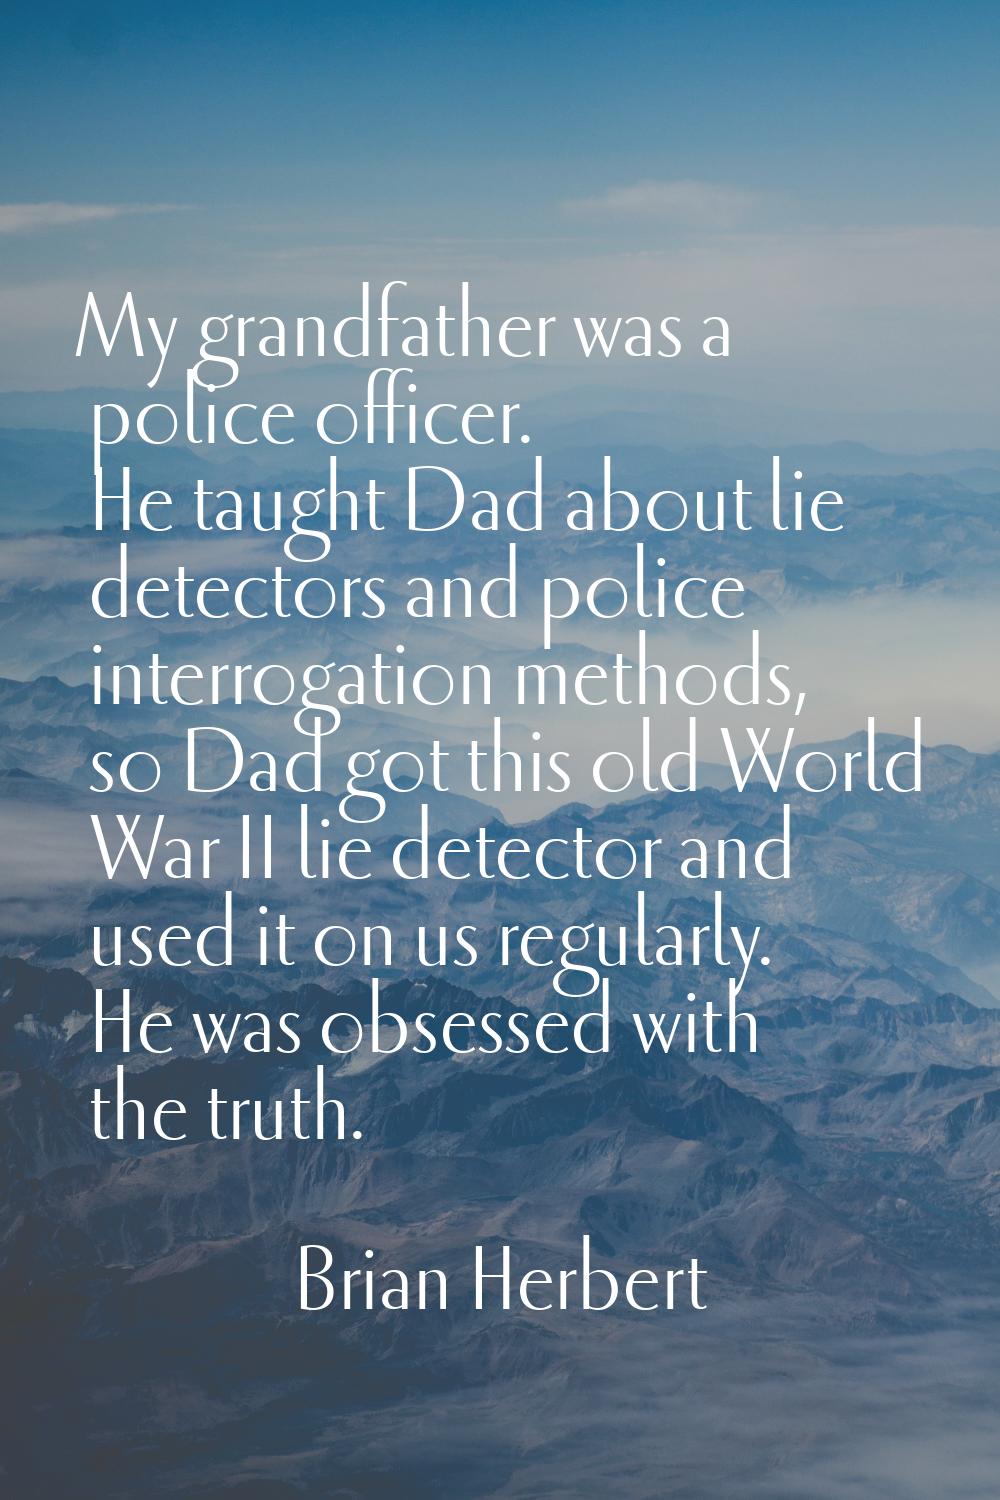 My grandfather was a police officer. He taught Dad about lie detectors and police interrogation met